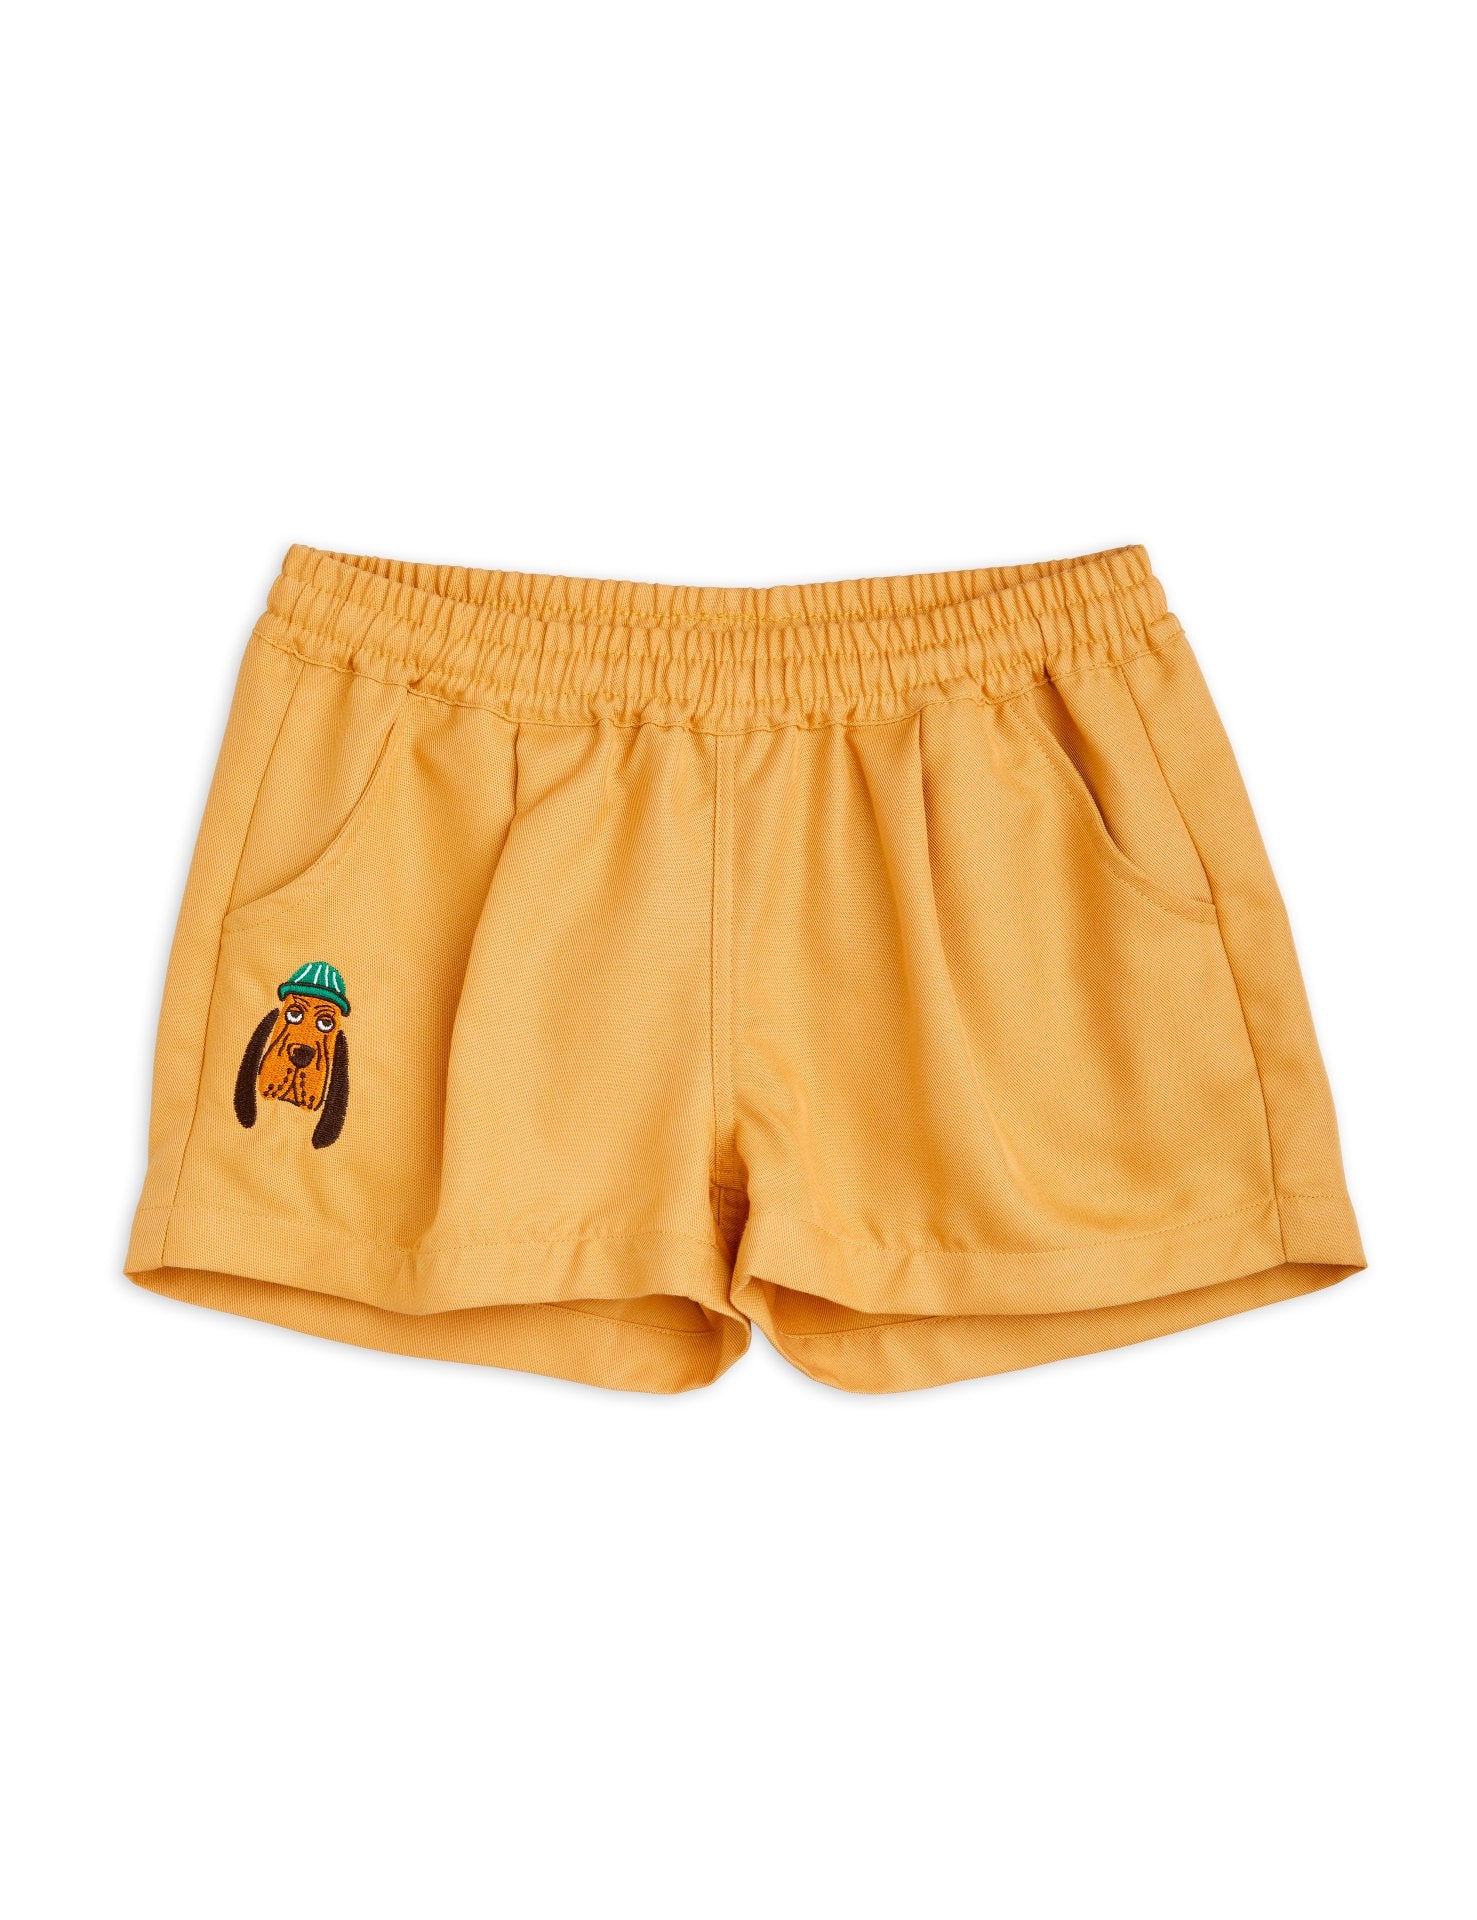 Bloodhound emb woven shorts